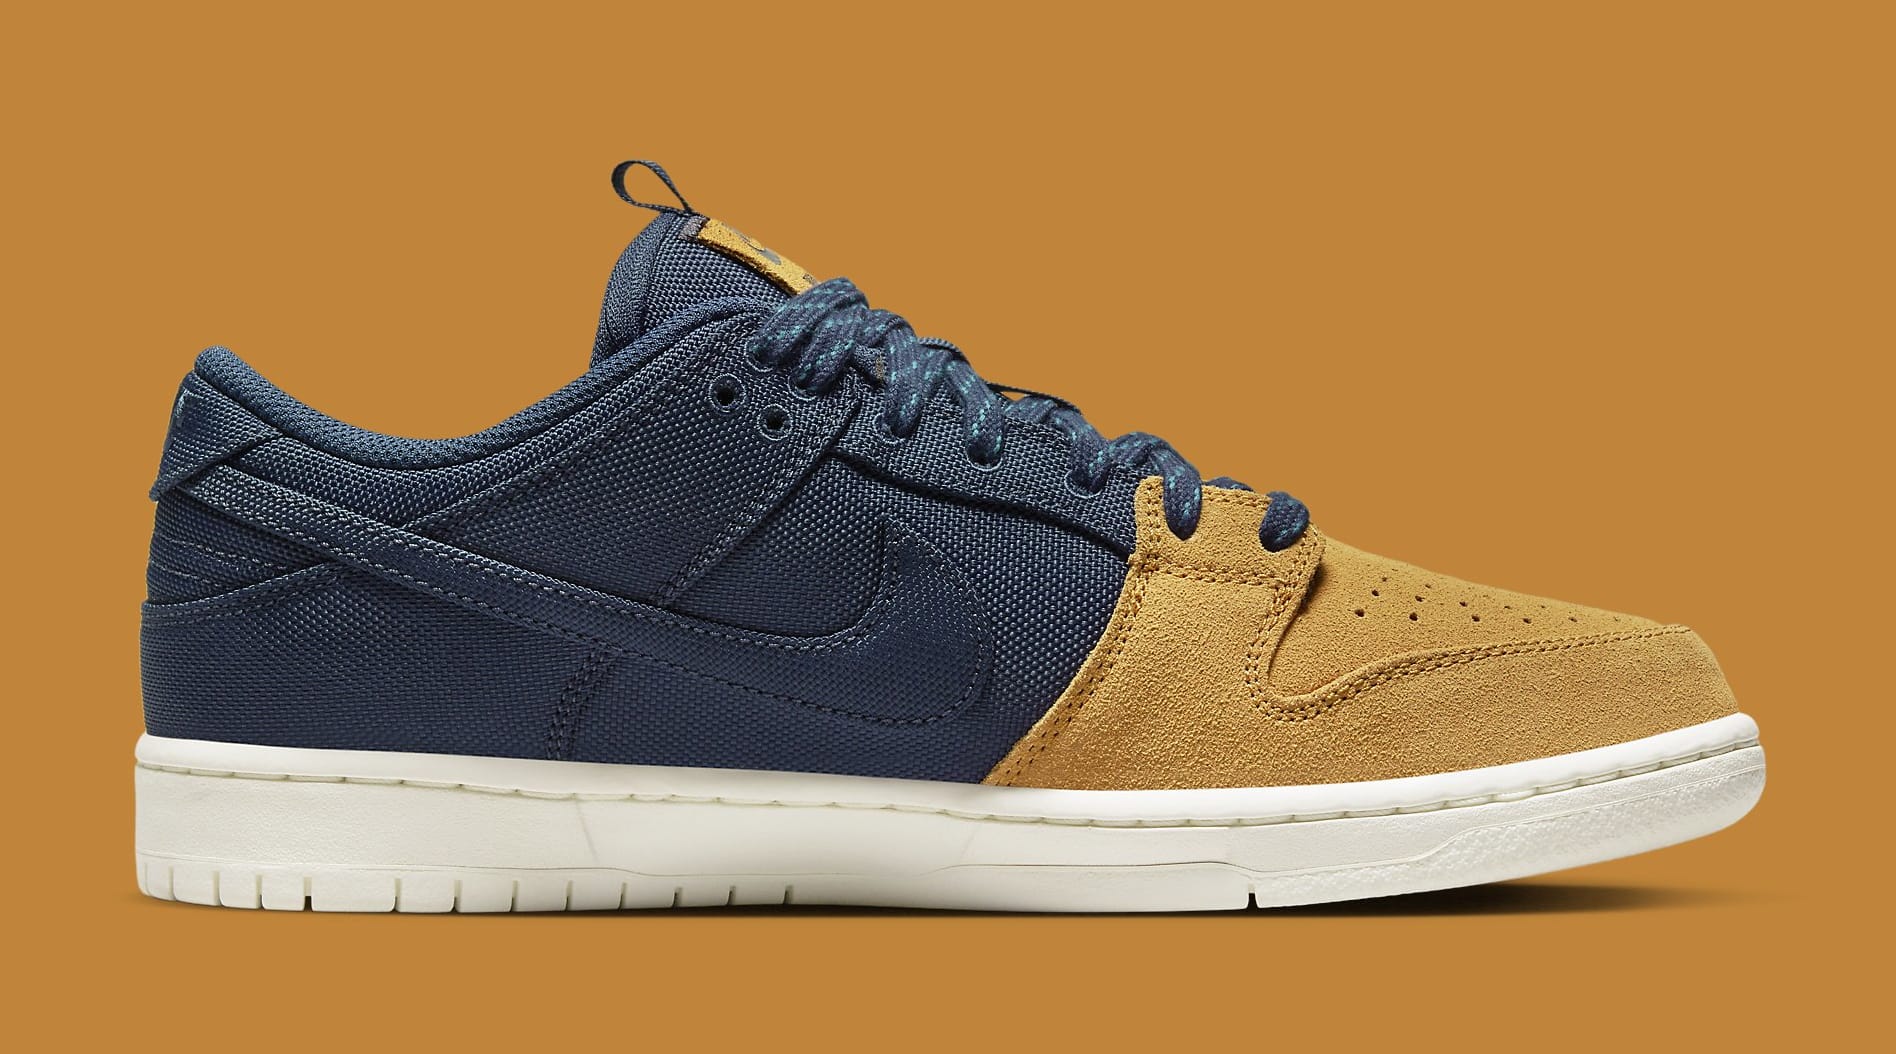 Backpacks Inspire This Nike SB Dunk Low | Complex